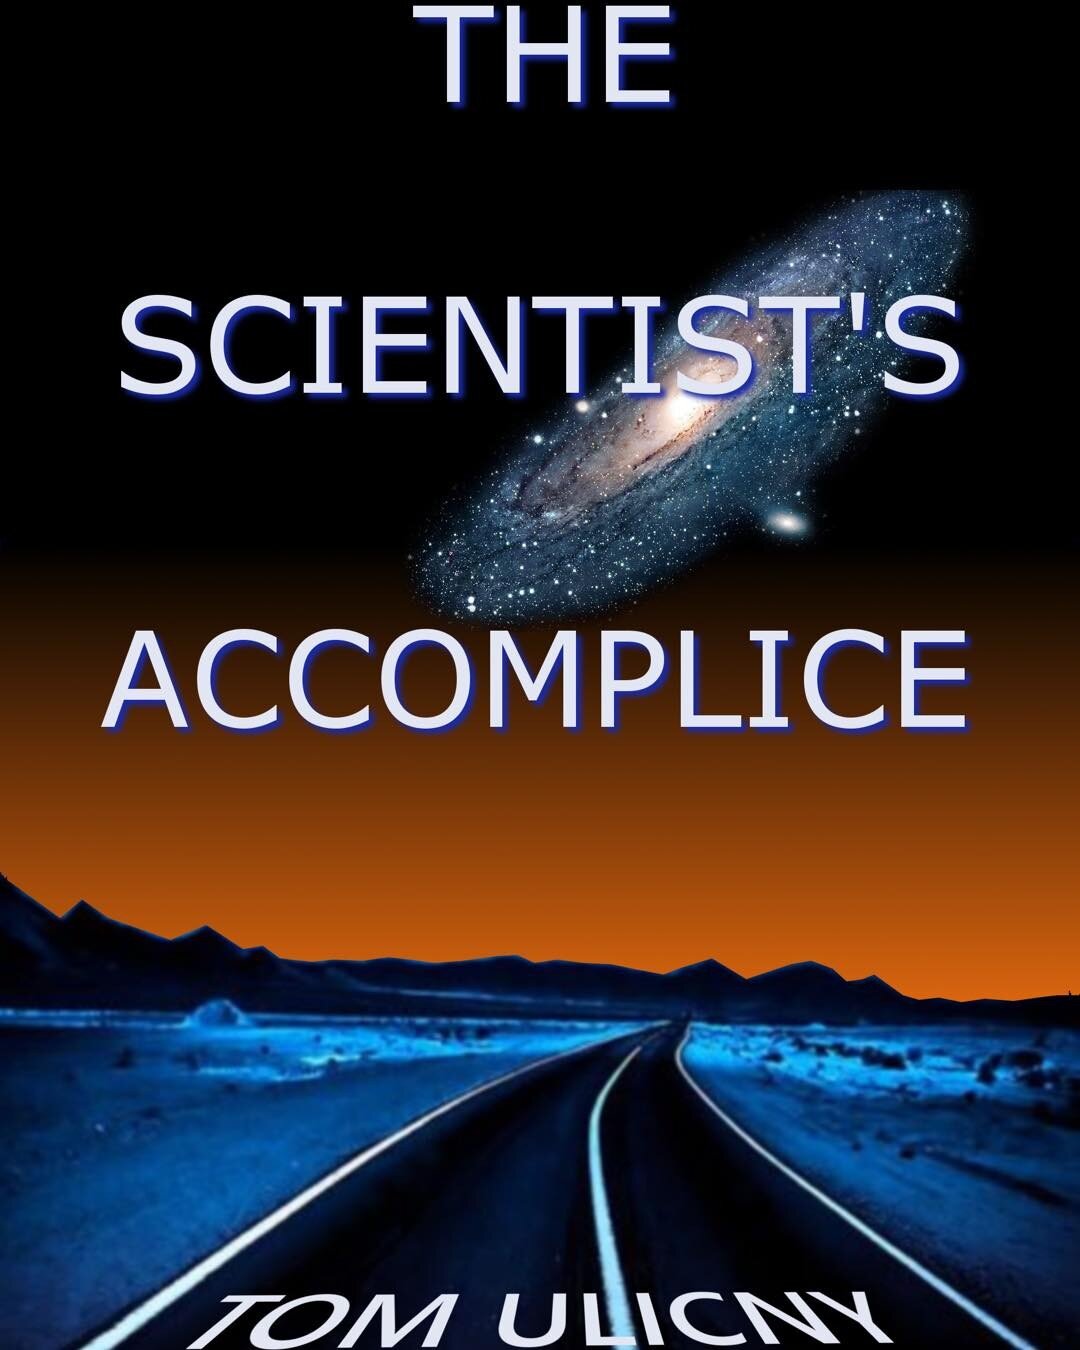 Don't miss it. Get your FREE ebook copy of The Scientist's Accomplice. Now through Monday https://tinyurl.com/ztgwbol #bookgiveaways